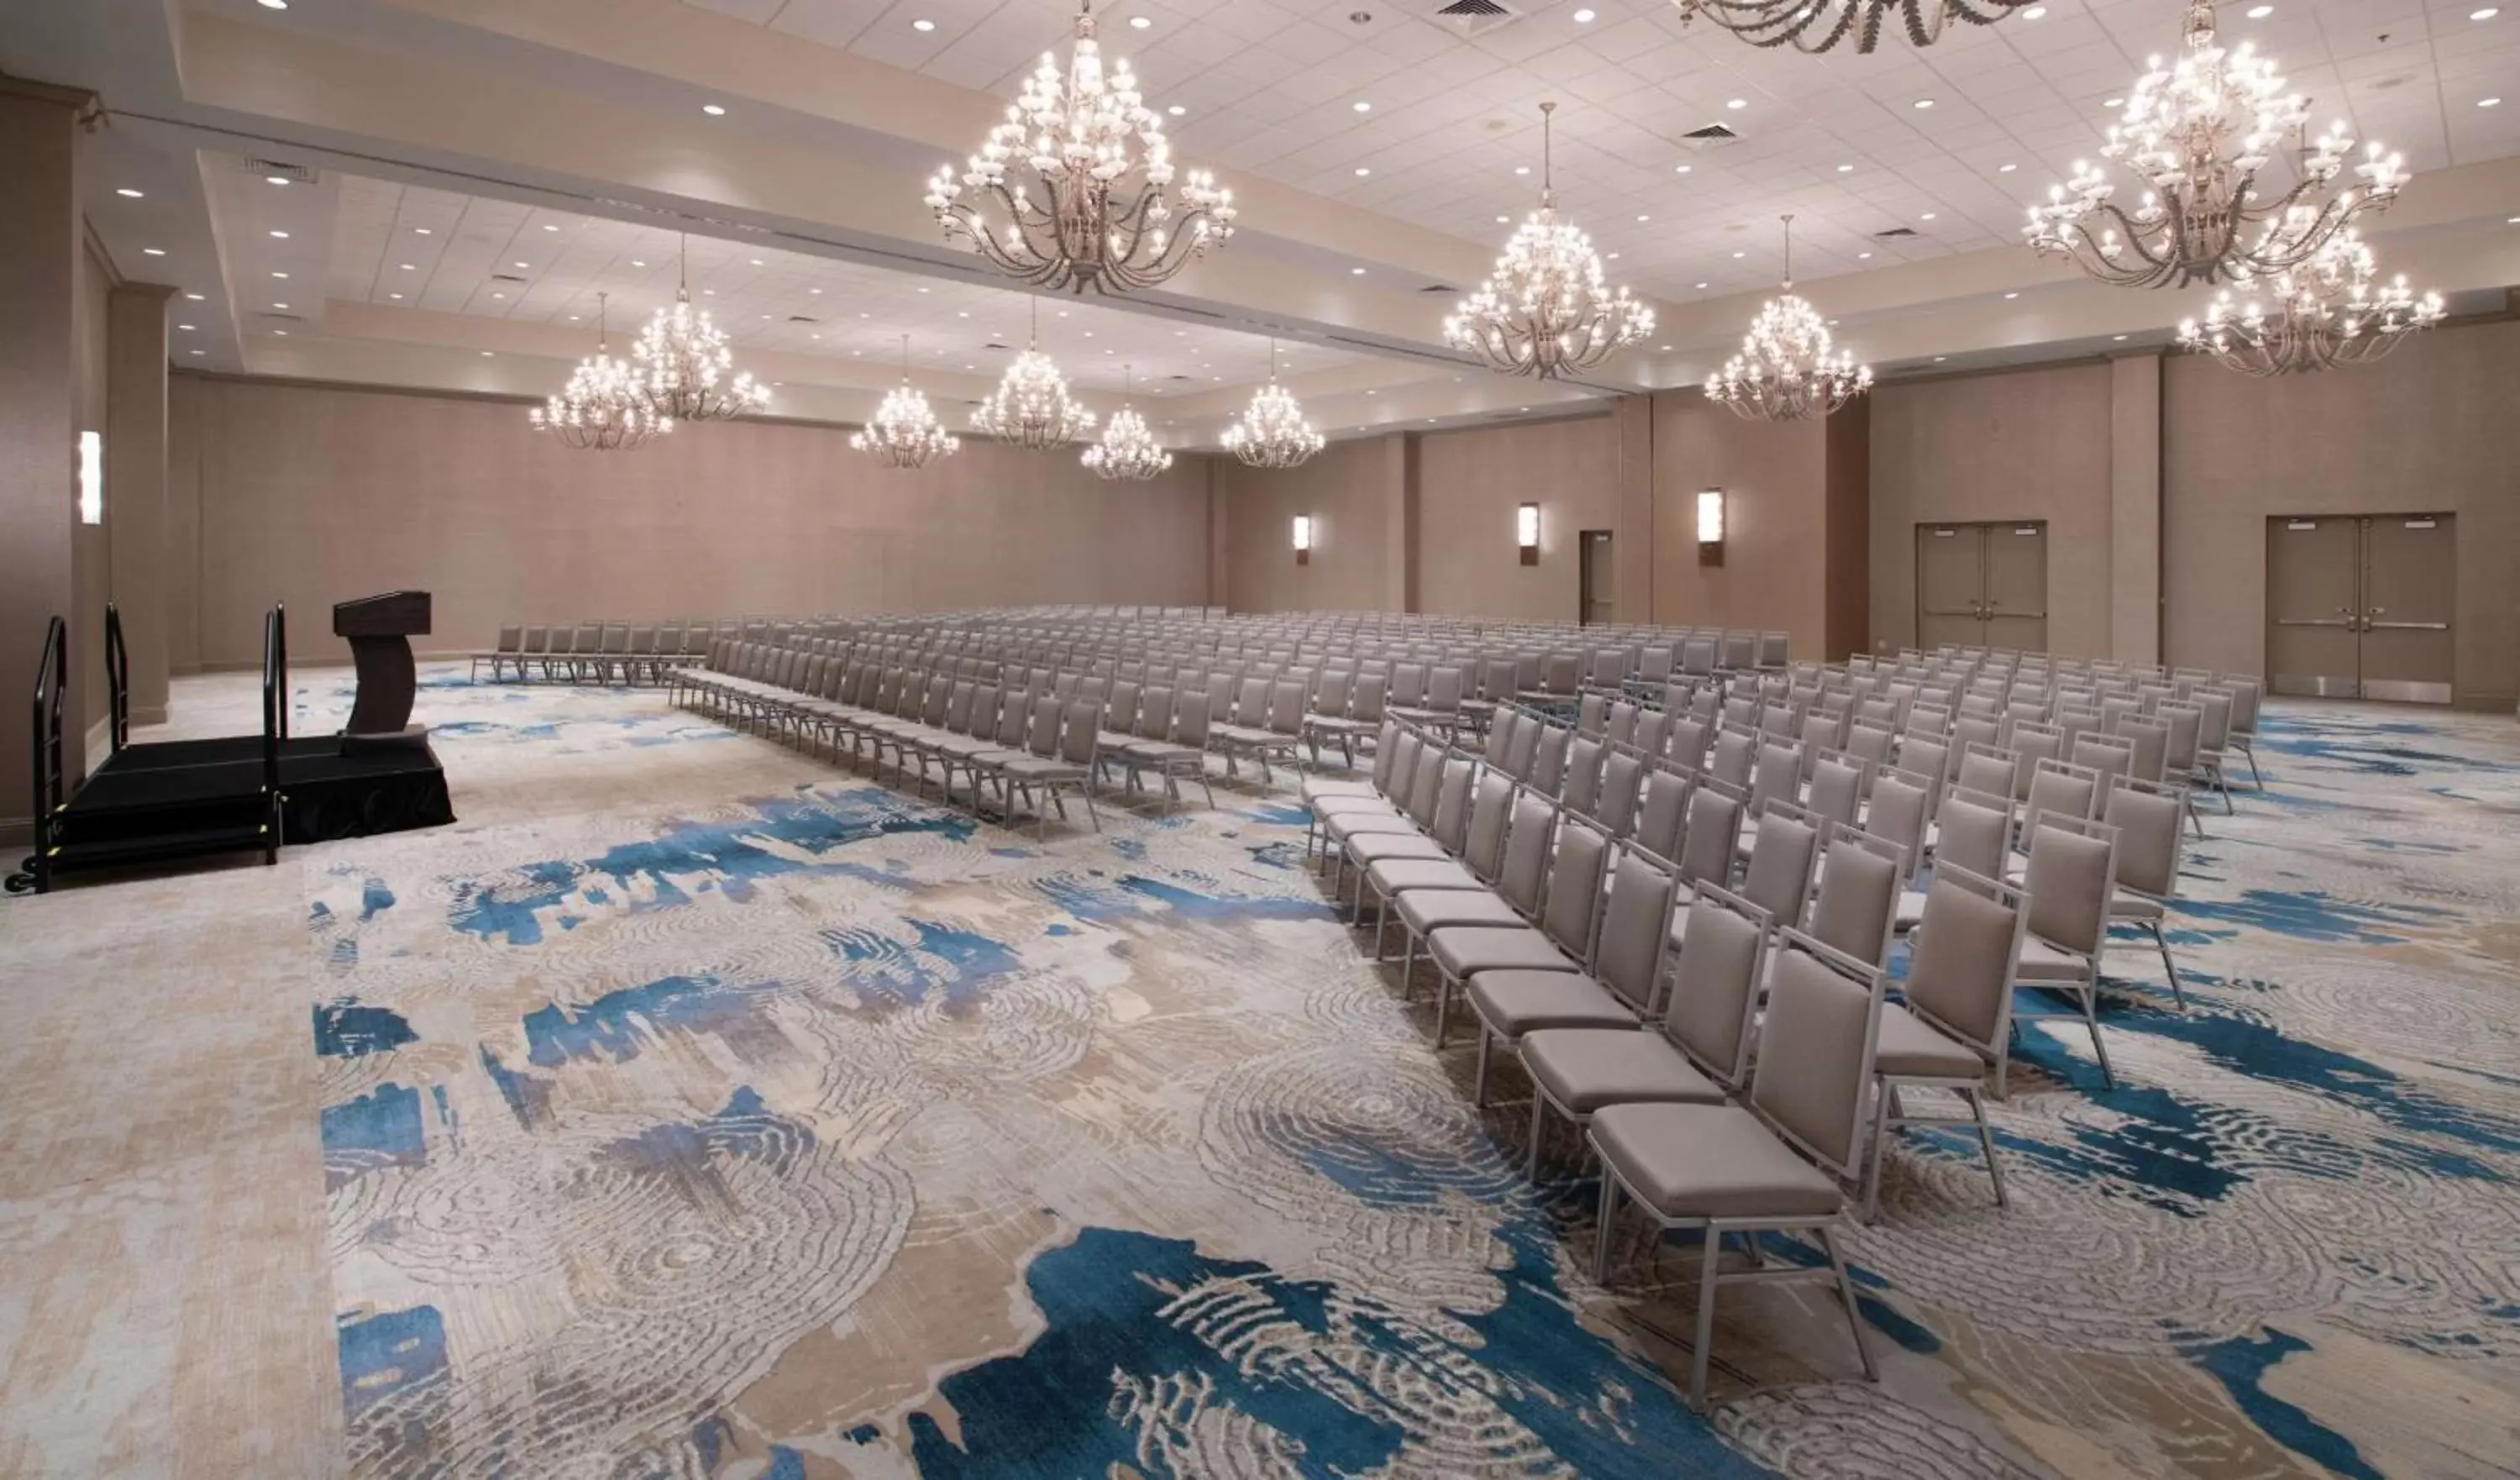 Meeting/conference room, Banquet Facilities in DoubleTree by Hilton Hotel Orlando at SeaWorld